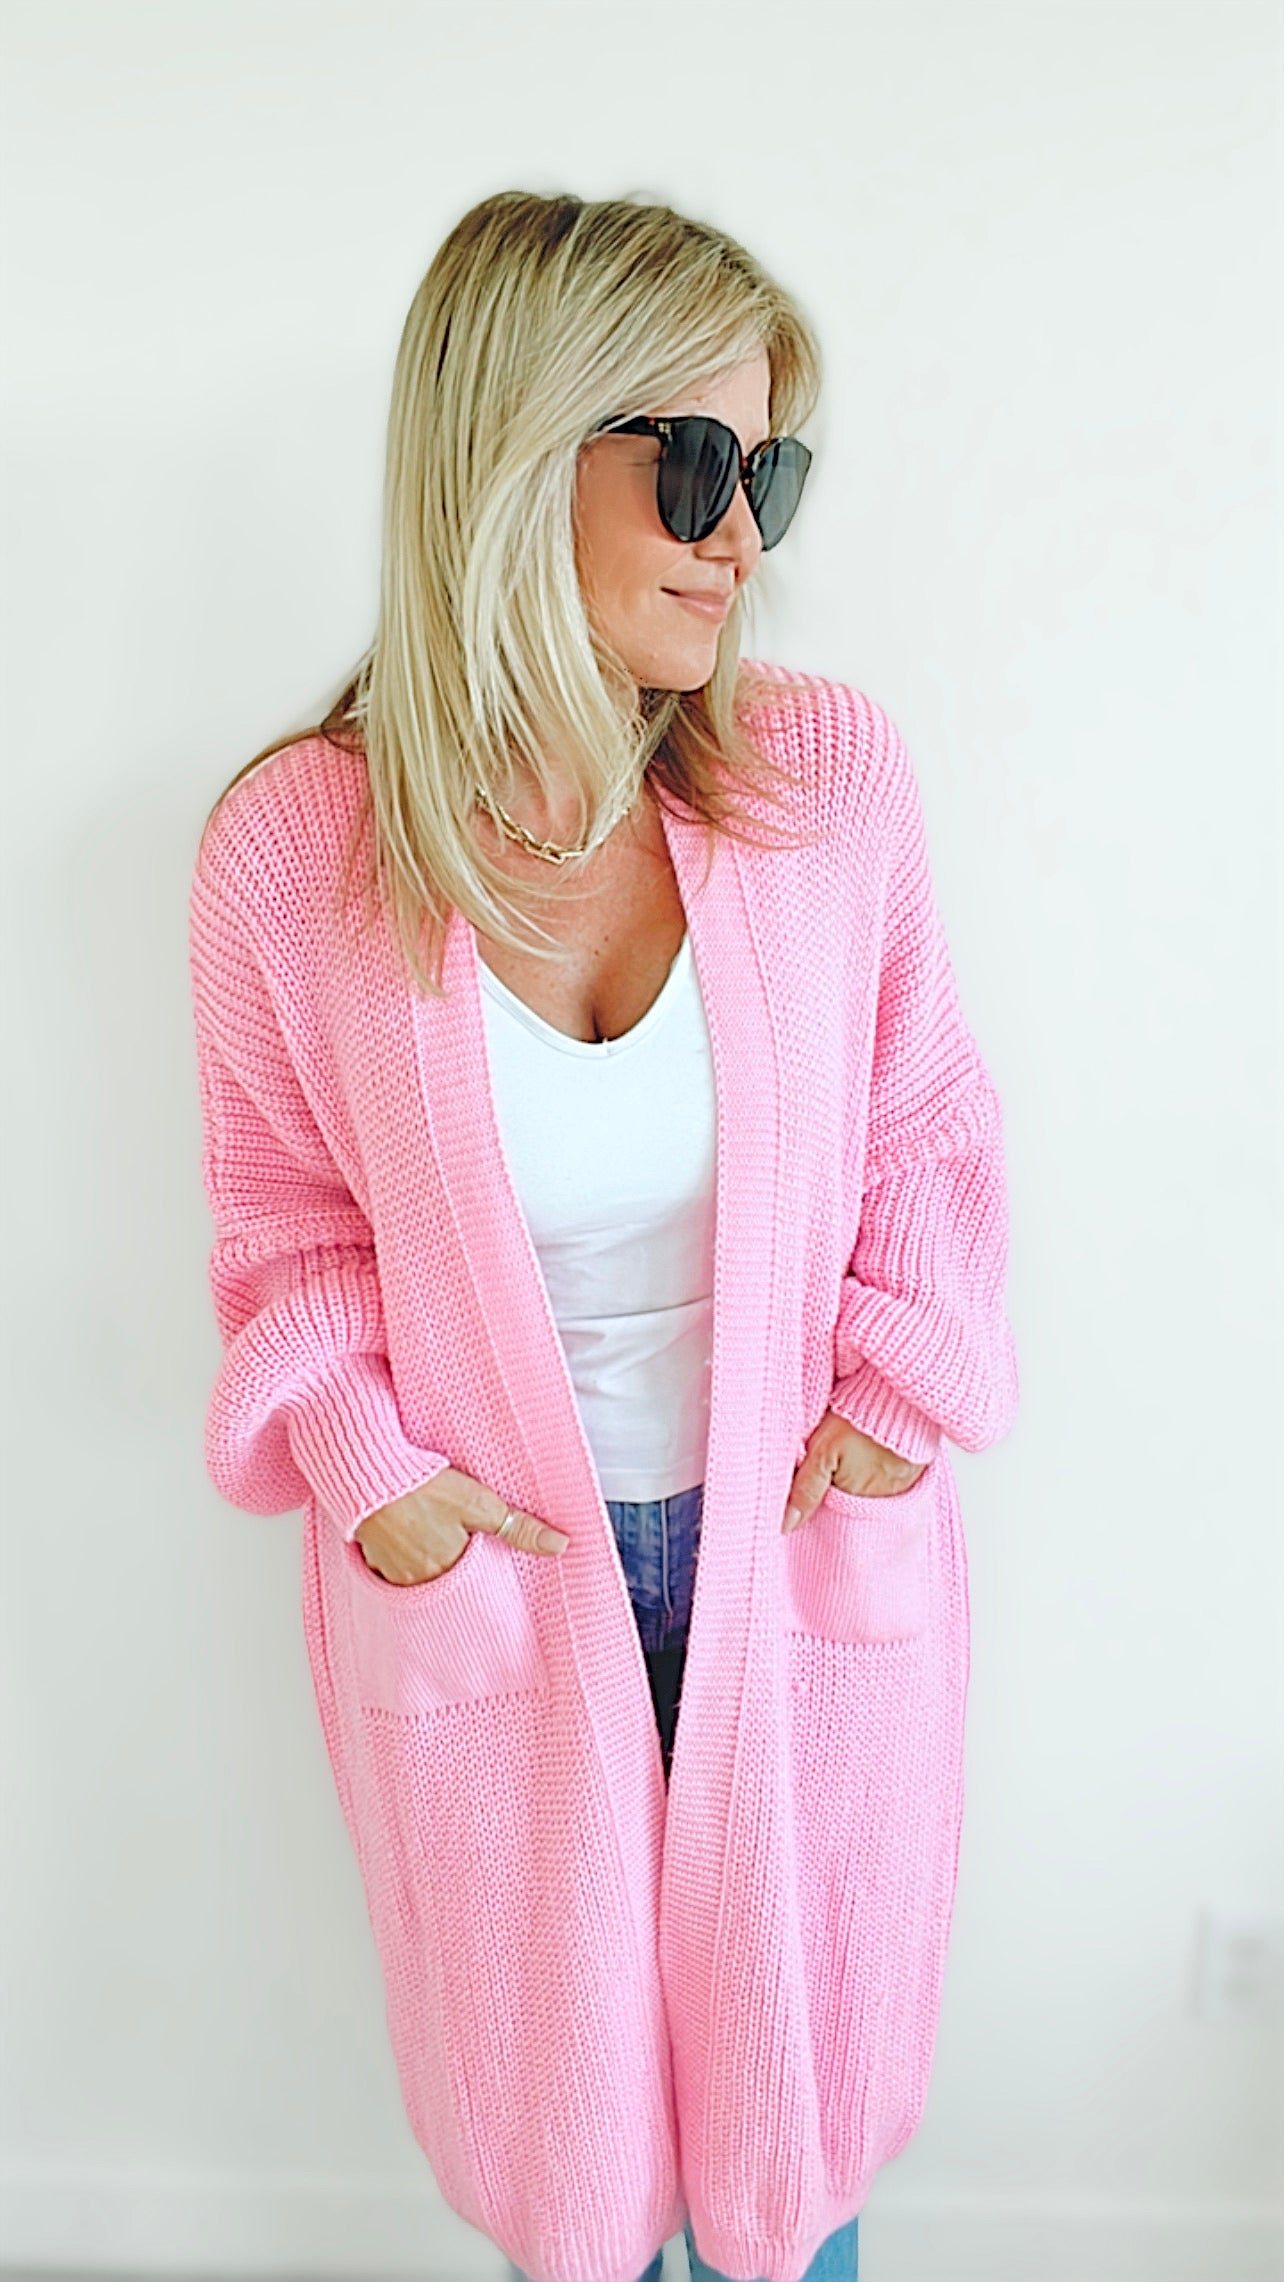 Sugar High Long Italian Cardigan-Pink-150 Cardigans/Layers-Germany-Coastal Bloom Boutique, find the trendiest versions of the popular styles and looks Located in Indialantic, FL